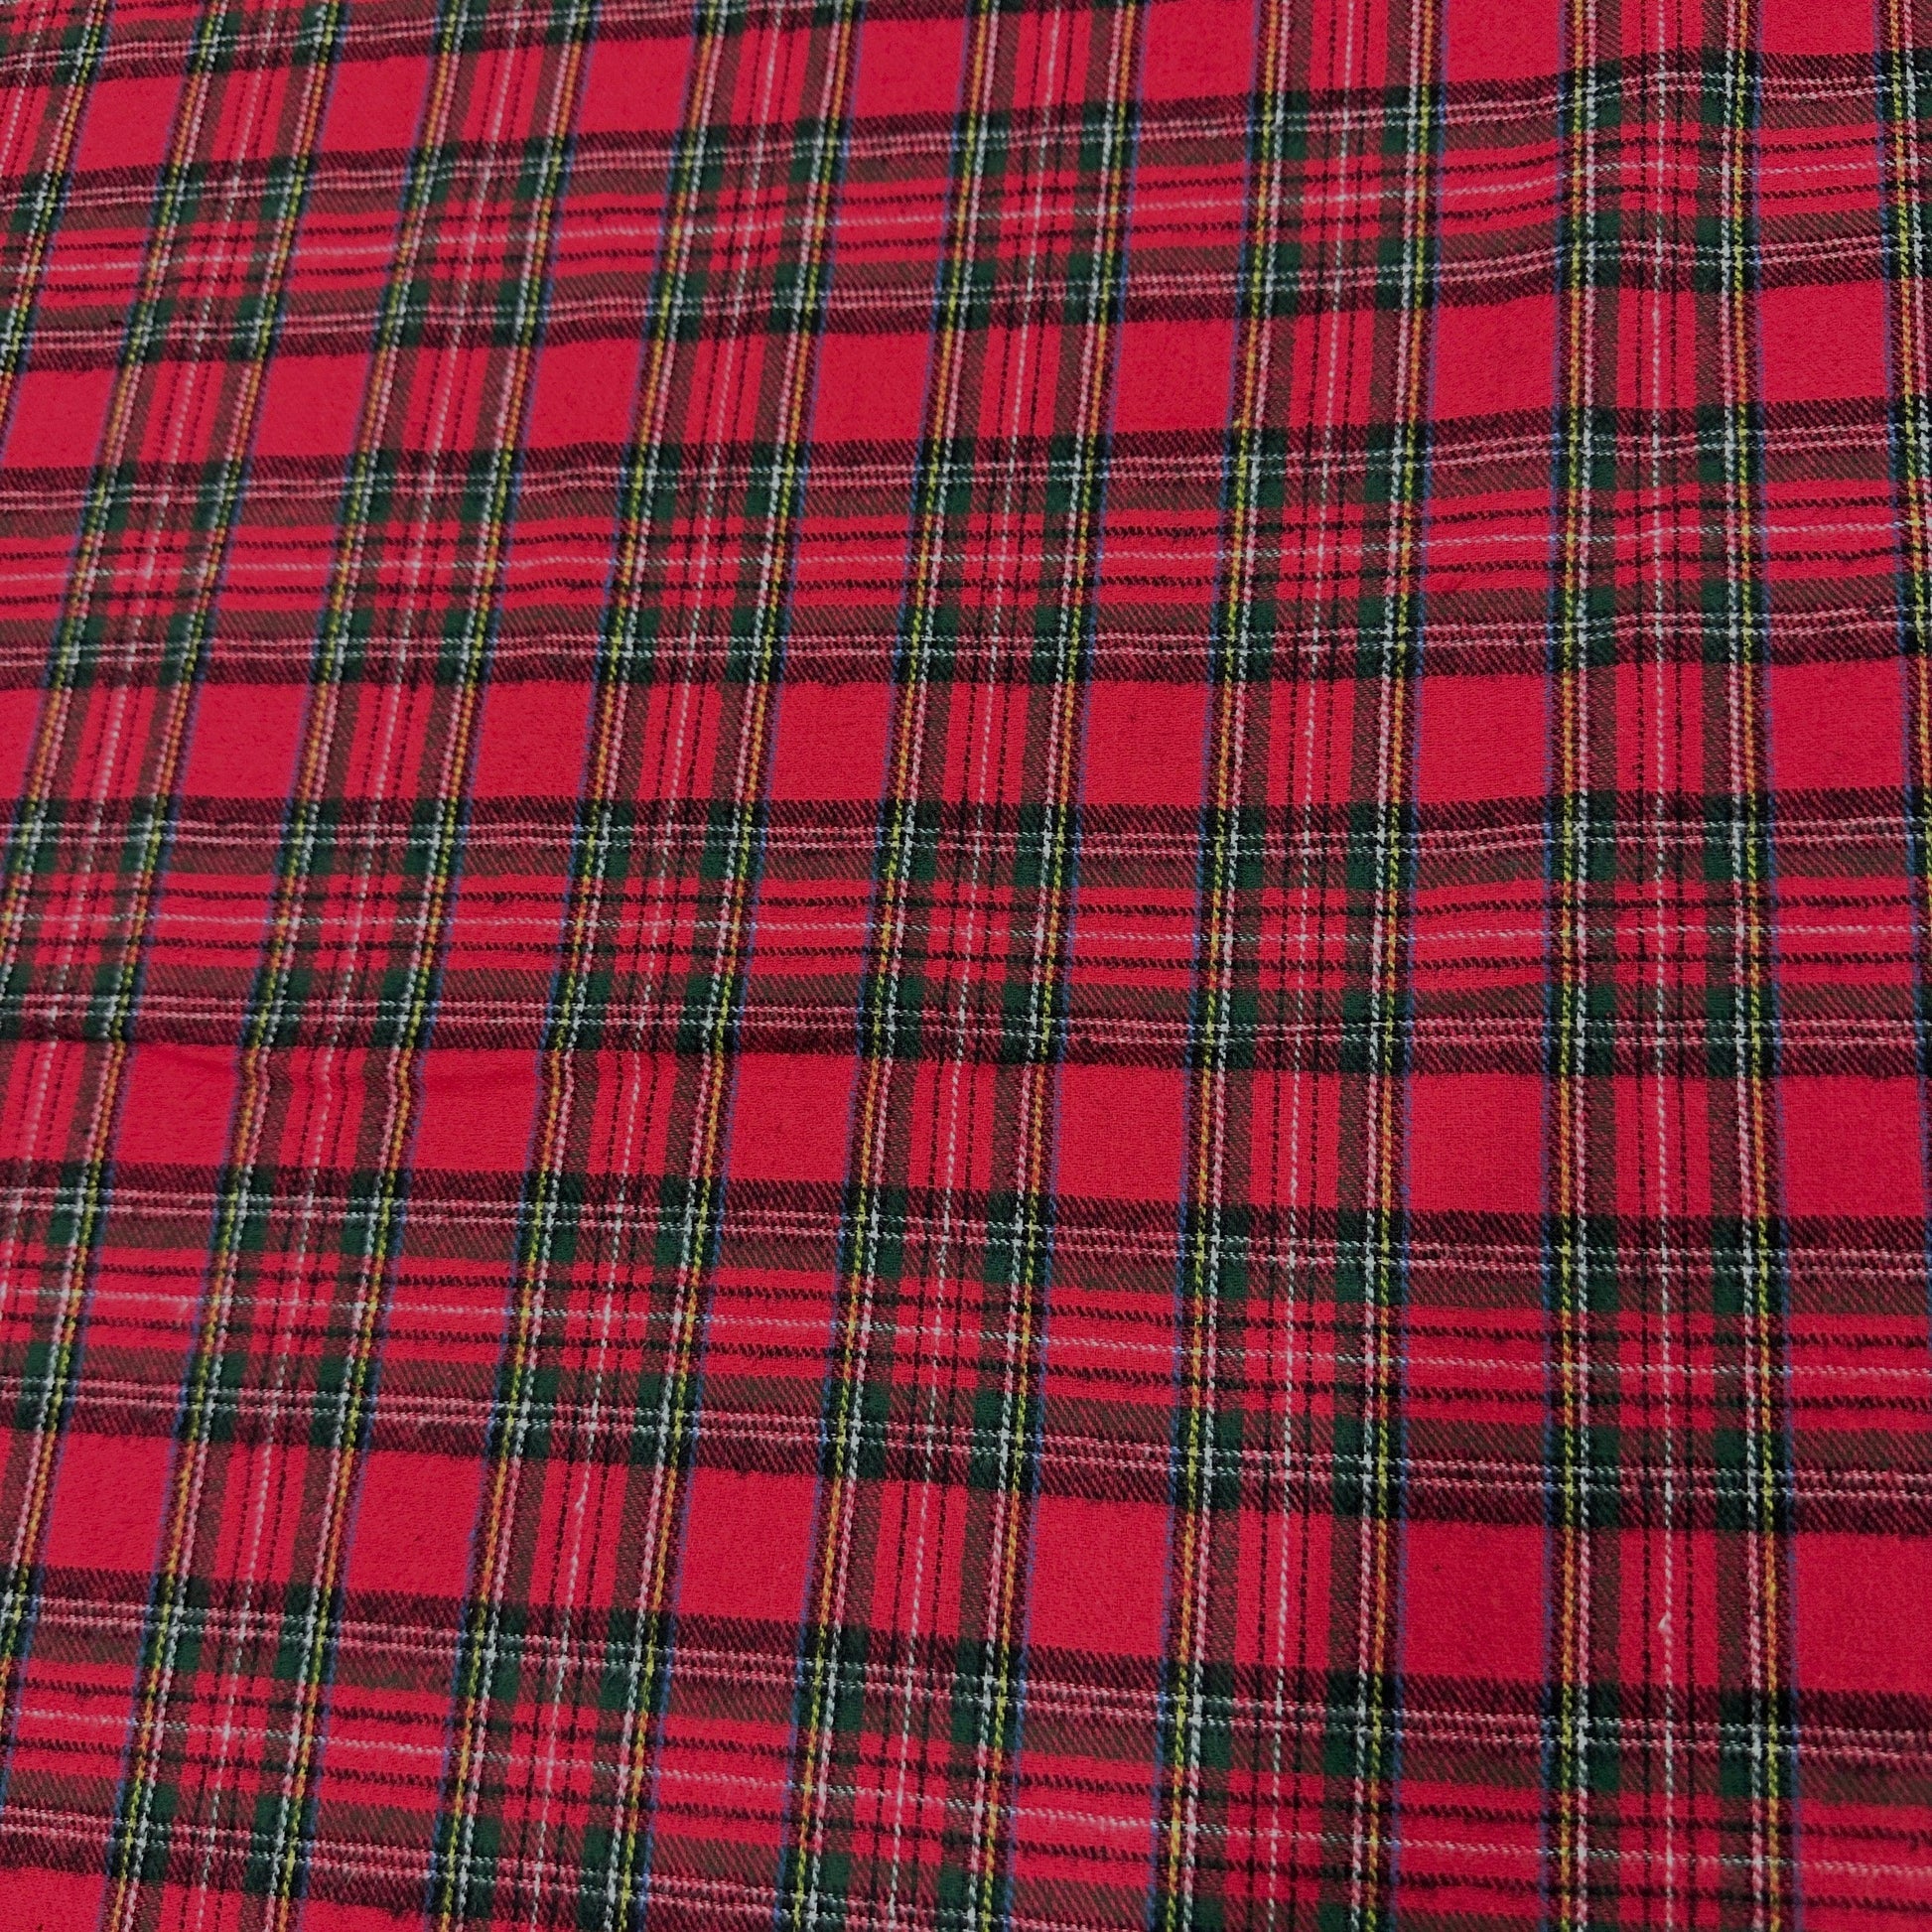 Red and Green Plaid Cotton Flannel Fabric - Nature's Fabrics